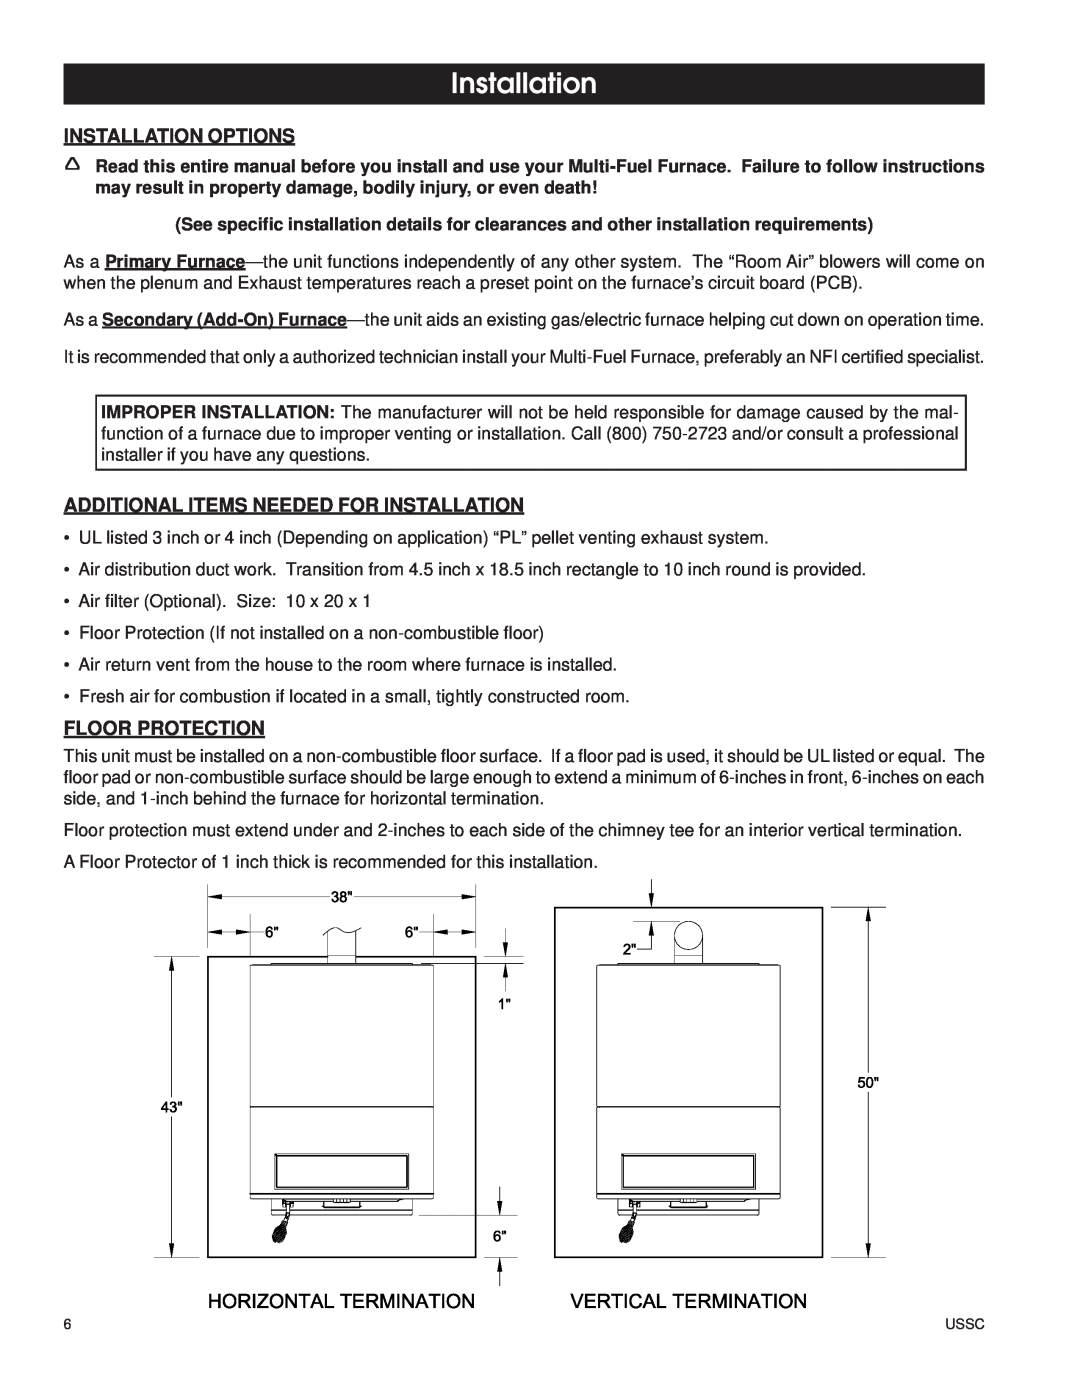 United States Stove 6110 owner manual Installation Options, Additional Items Needed For Installation, Floor Protection 